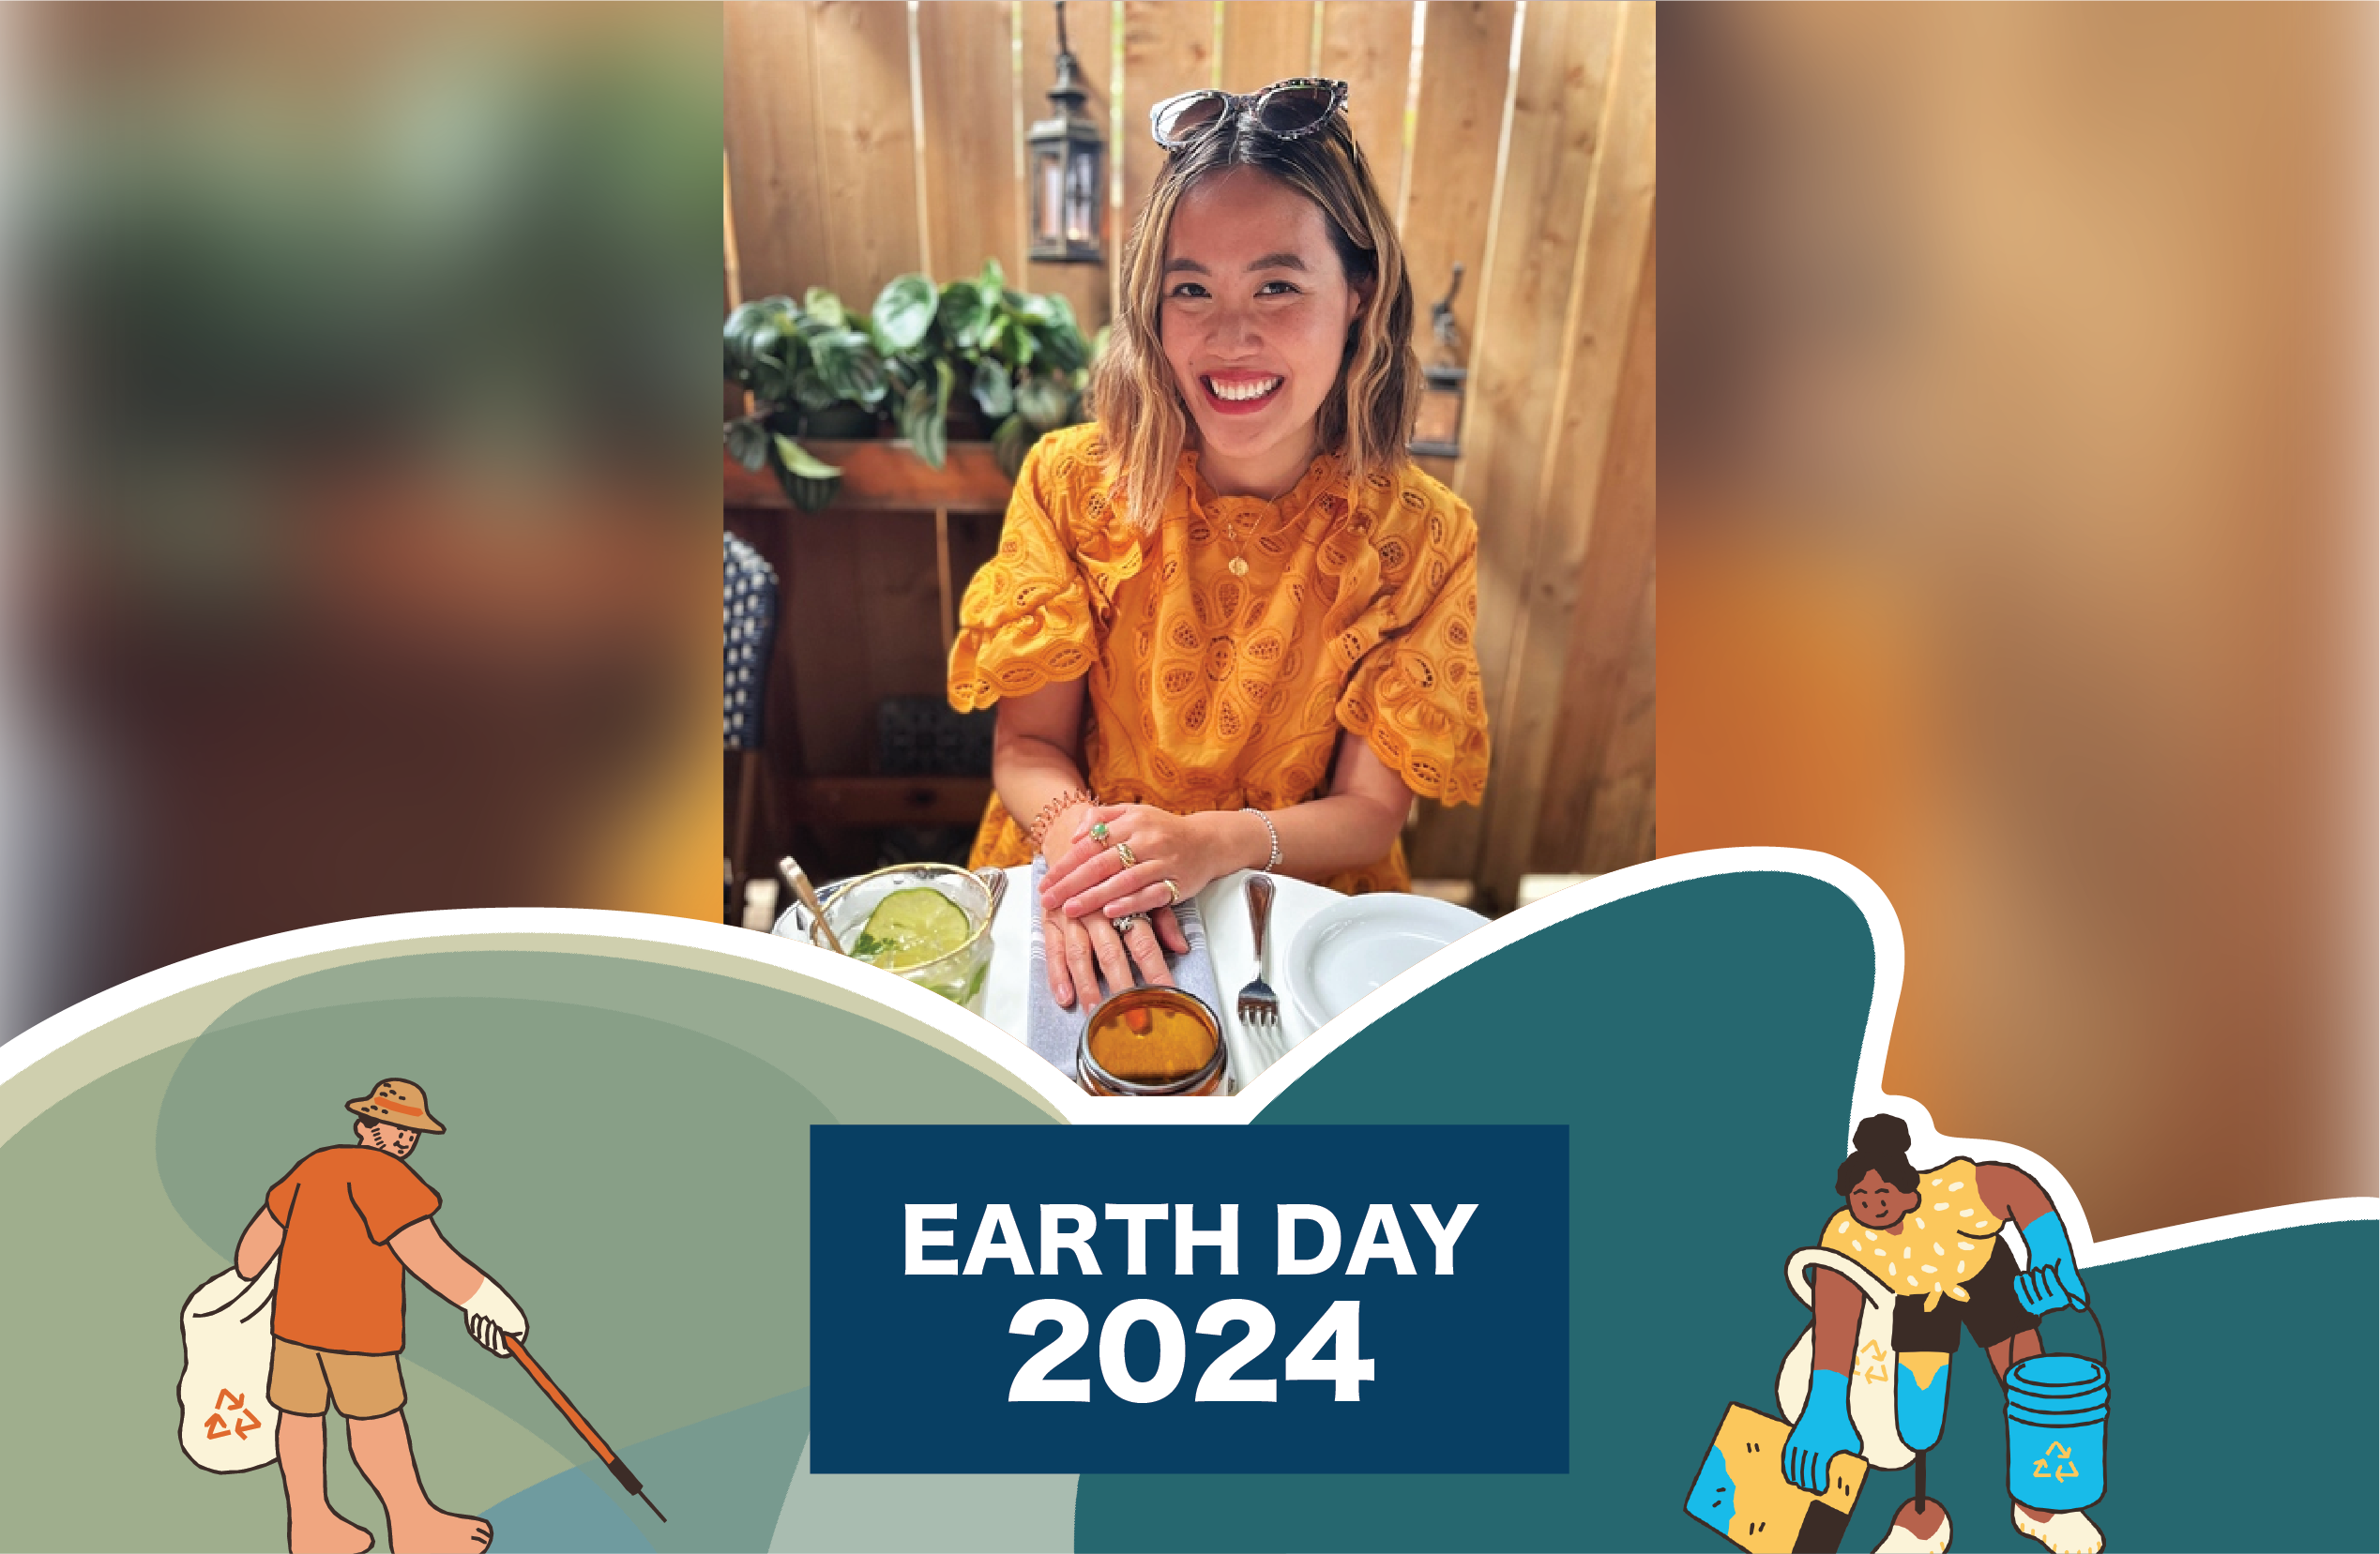 Young woman sitting at table with wooden fence background and an Earth Day 2024 graphic